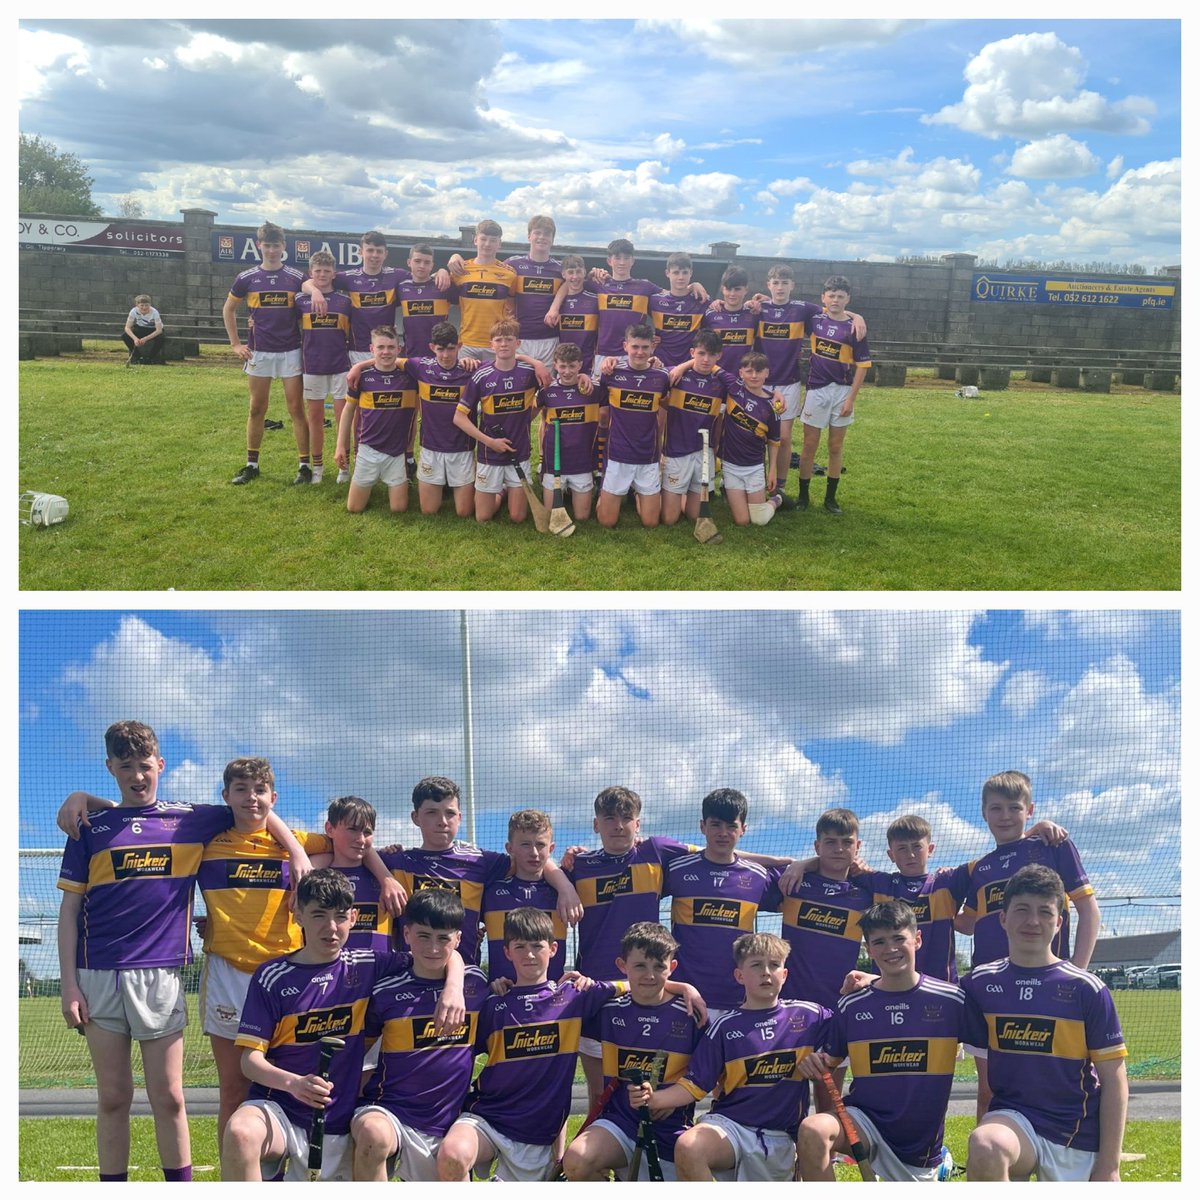 All roads lead to Thurles tomorrow as our A & C U15 hurlers are both in the Feile hurling finals in Dr Morris pk. 
The Division 8 match is at 10.30 on pitch 3 V Durlas Og. The Division 1 match is at 12.45 on pitch 1 V Durlas Og. €5 entry person to Dr Morris pk.
Hon Newport! 💪💪